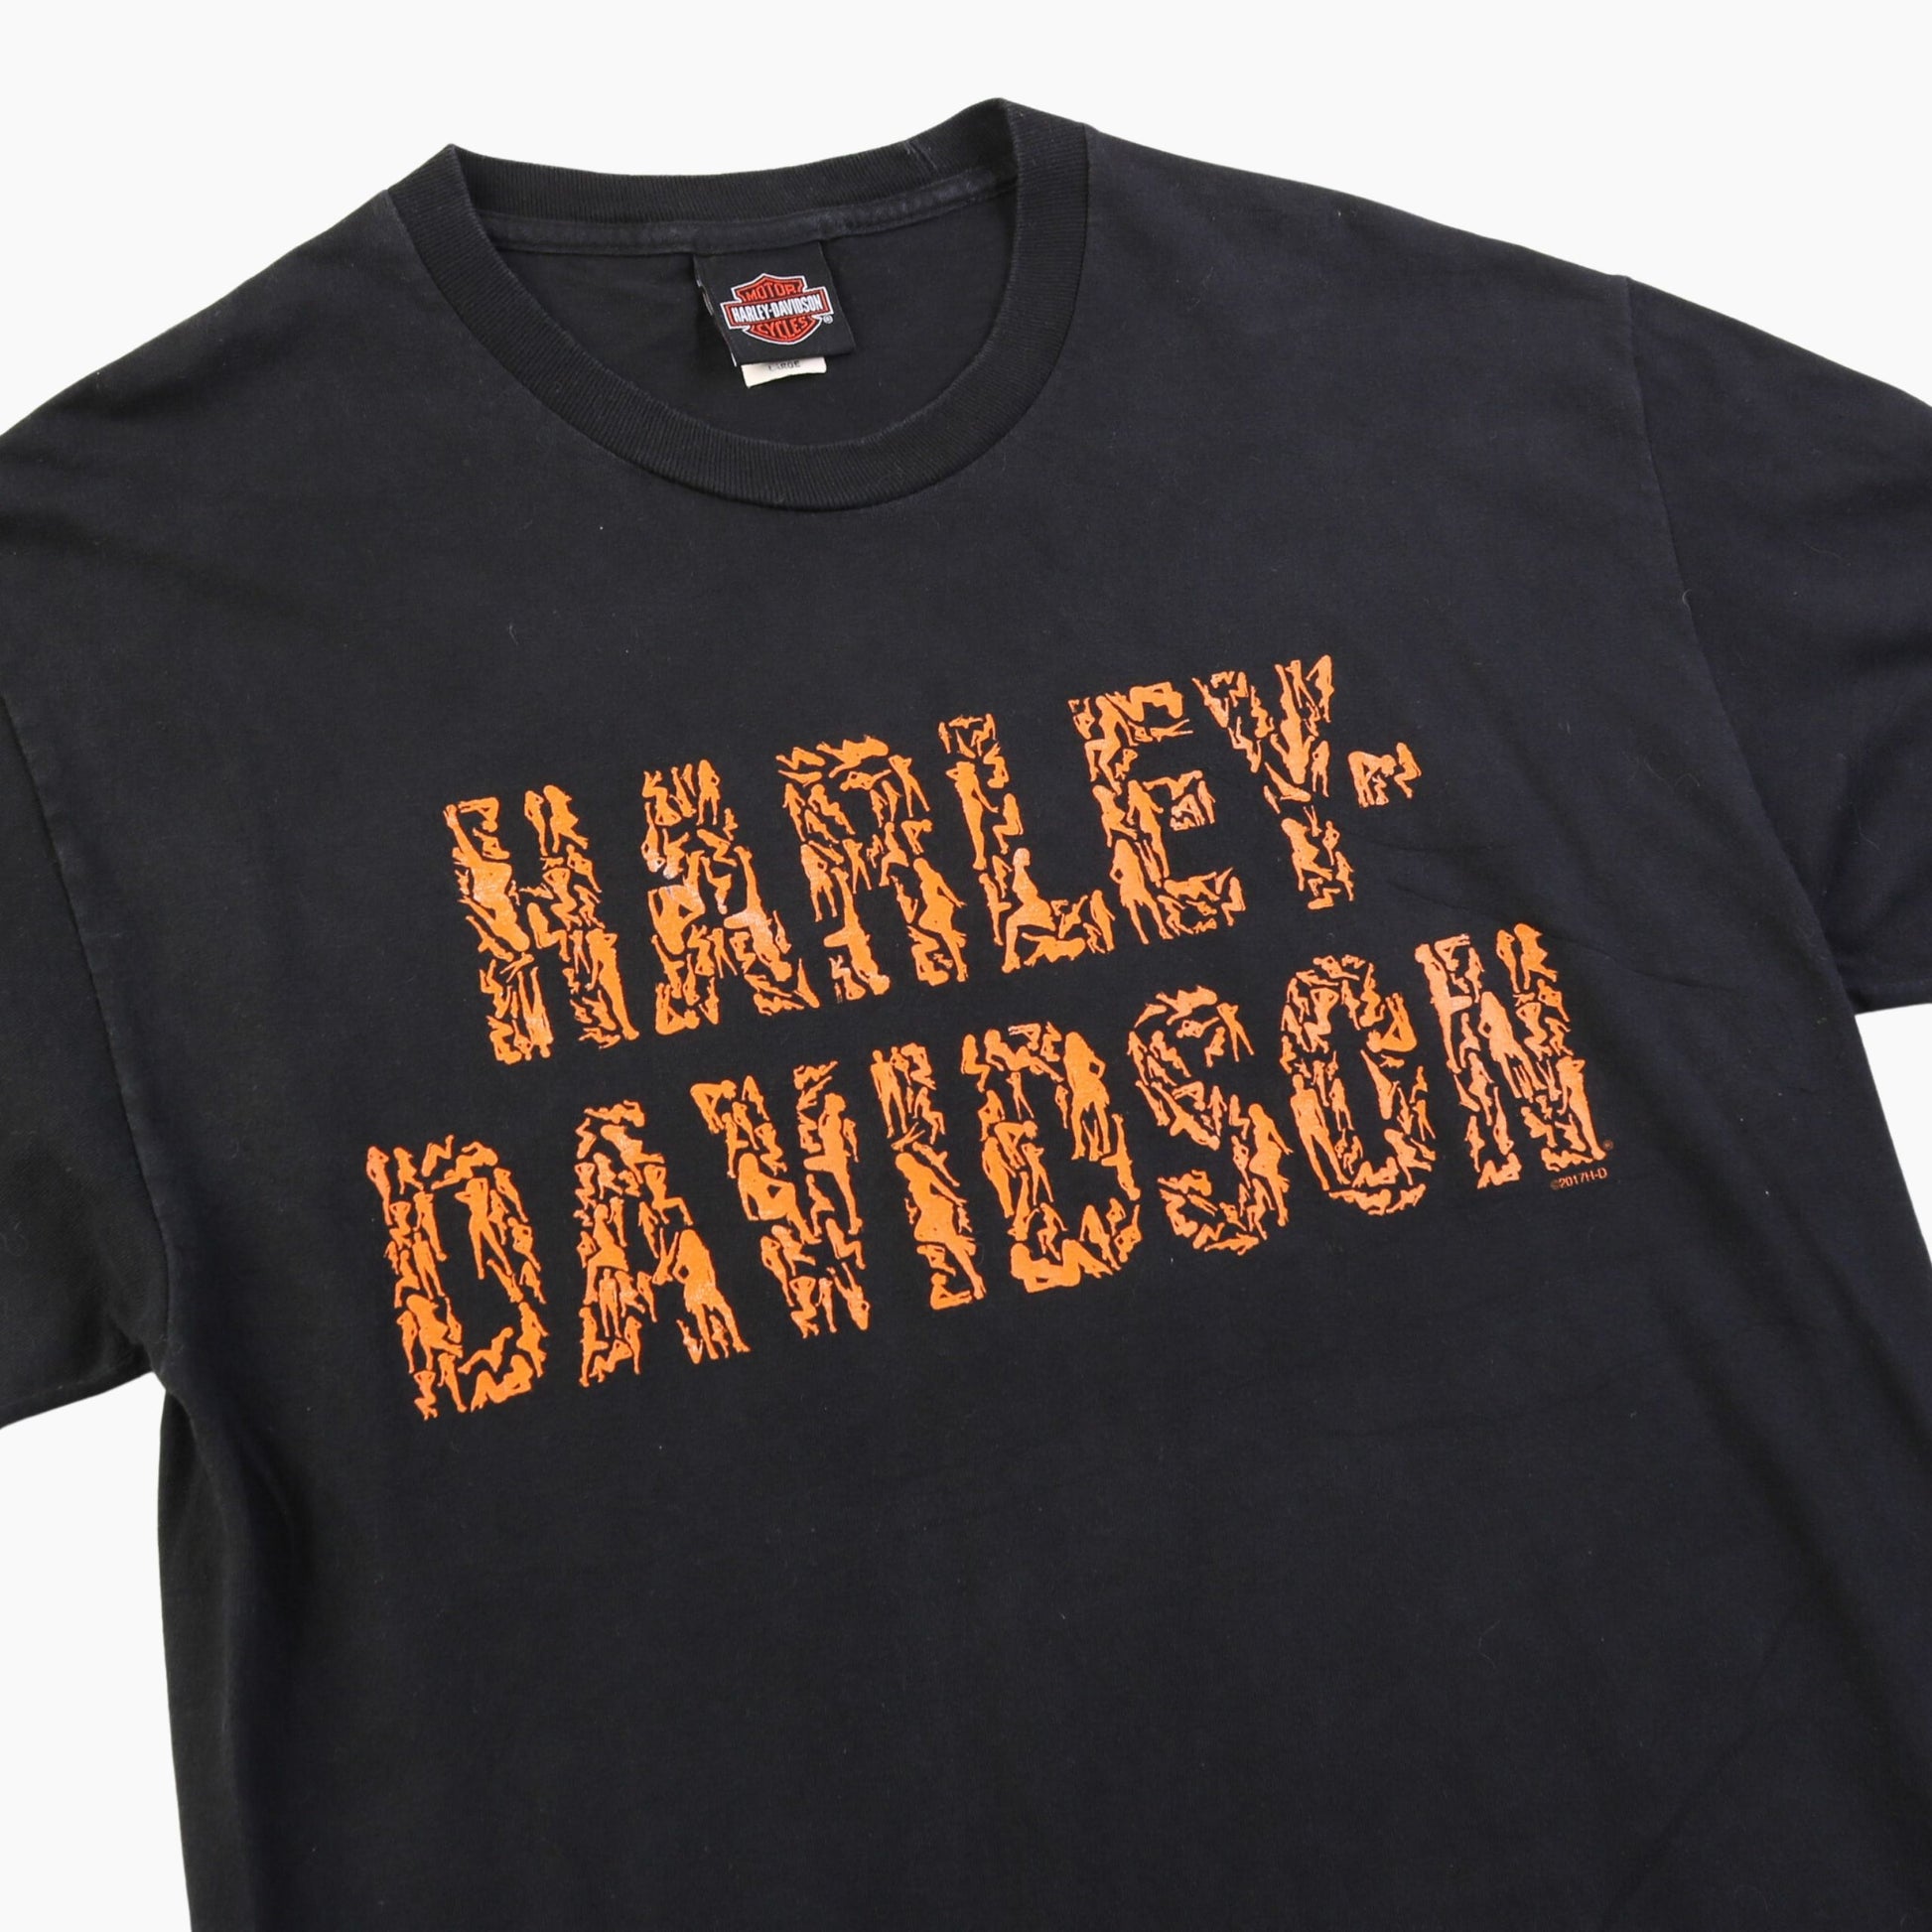 Vintage 'Madison Wisconsin' T-Shirt - American Madness